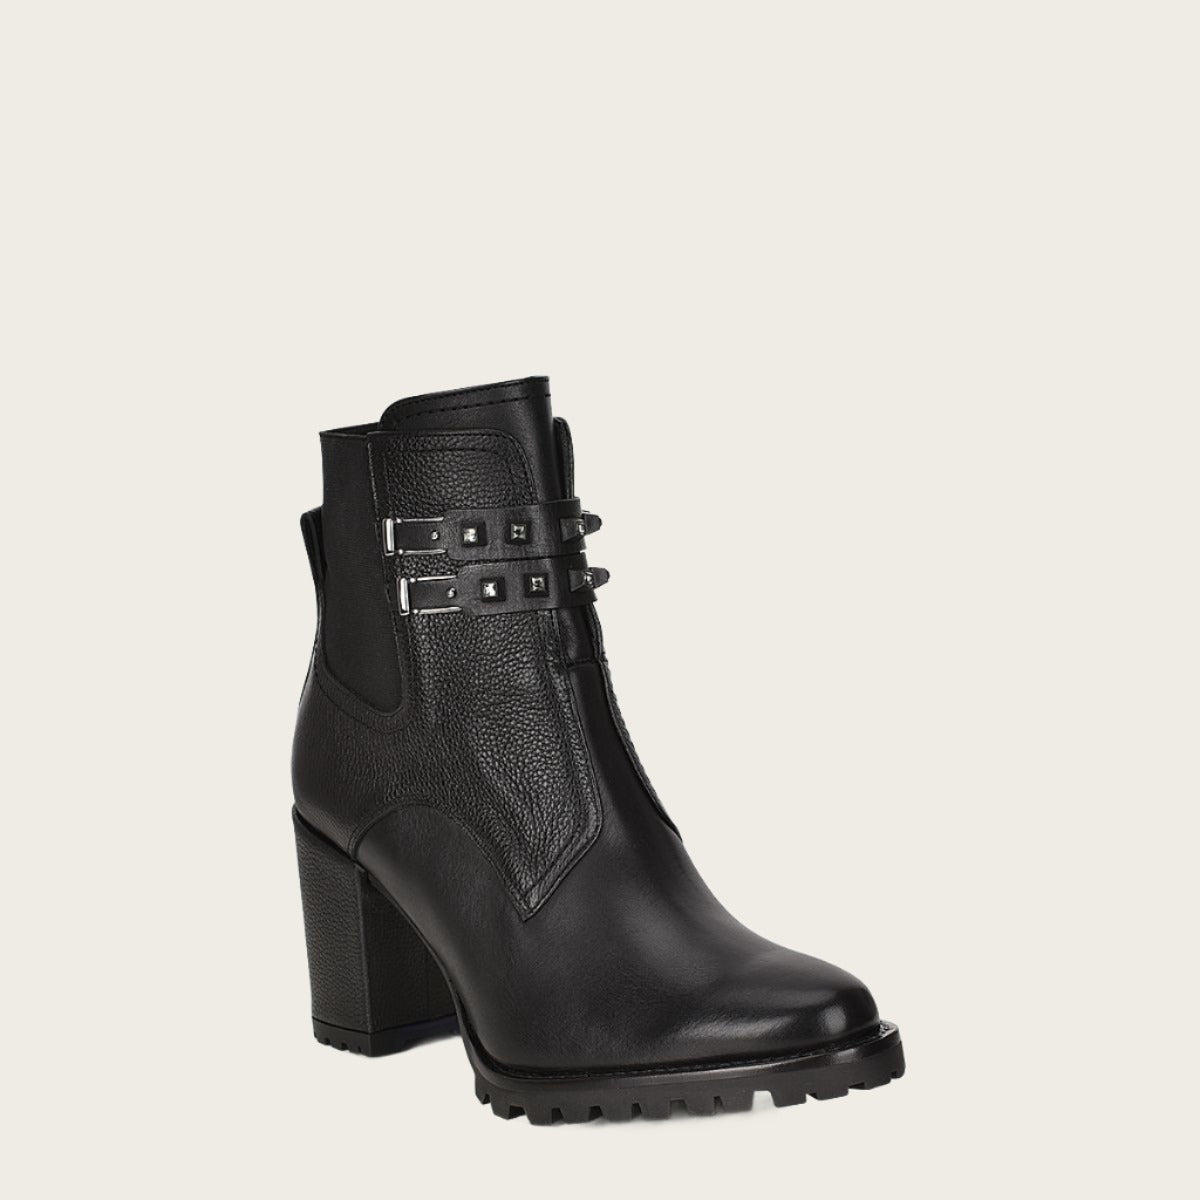 This black combination leather urban ankle bootie is perfect for the modern woman.